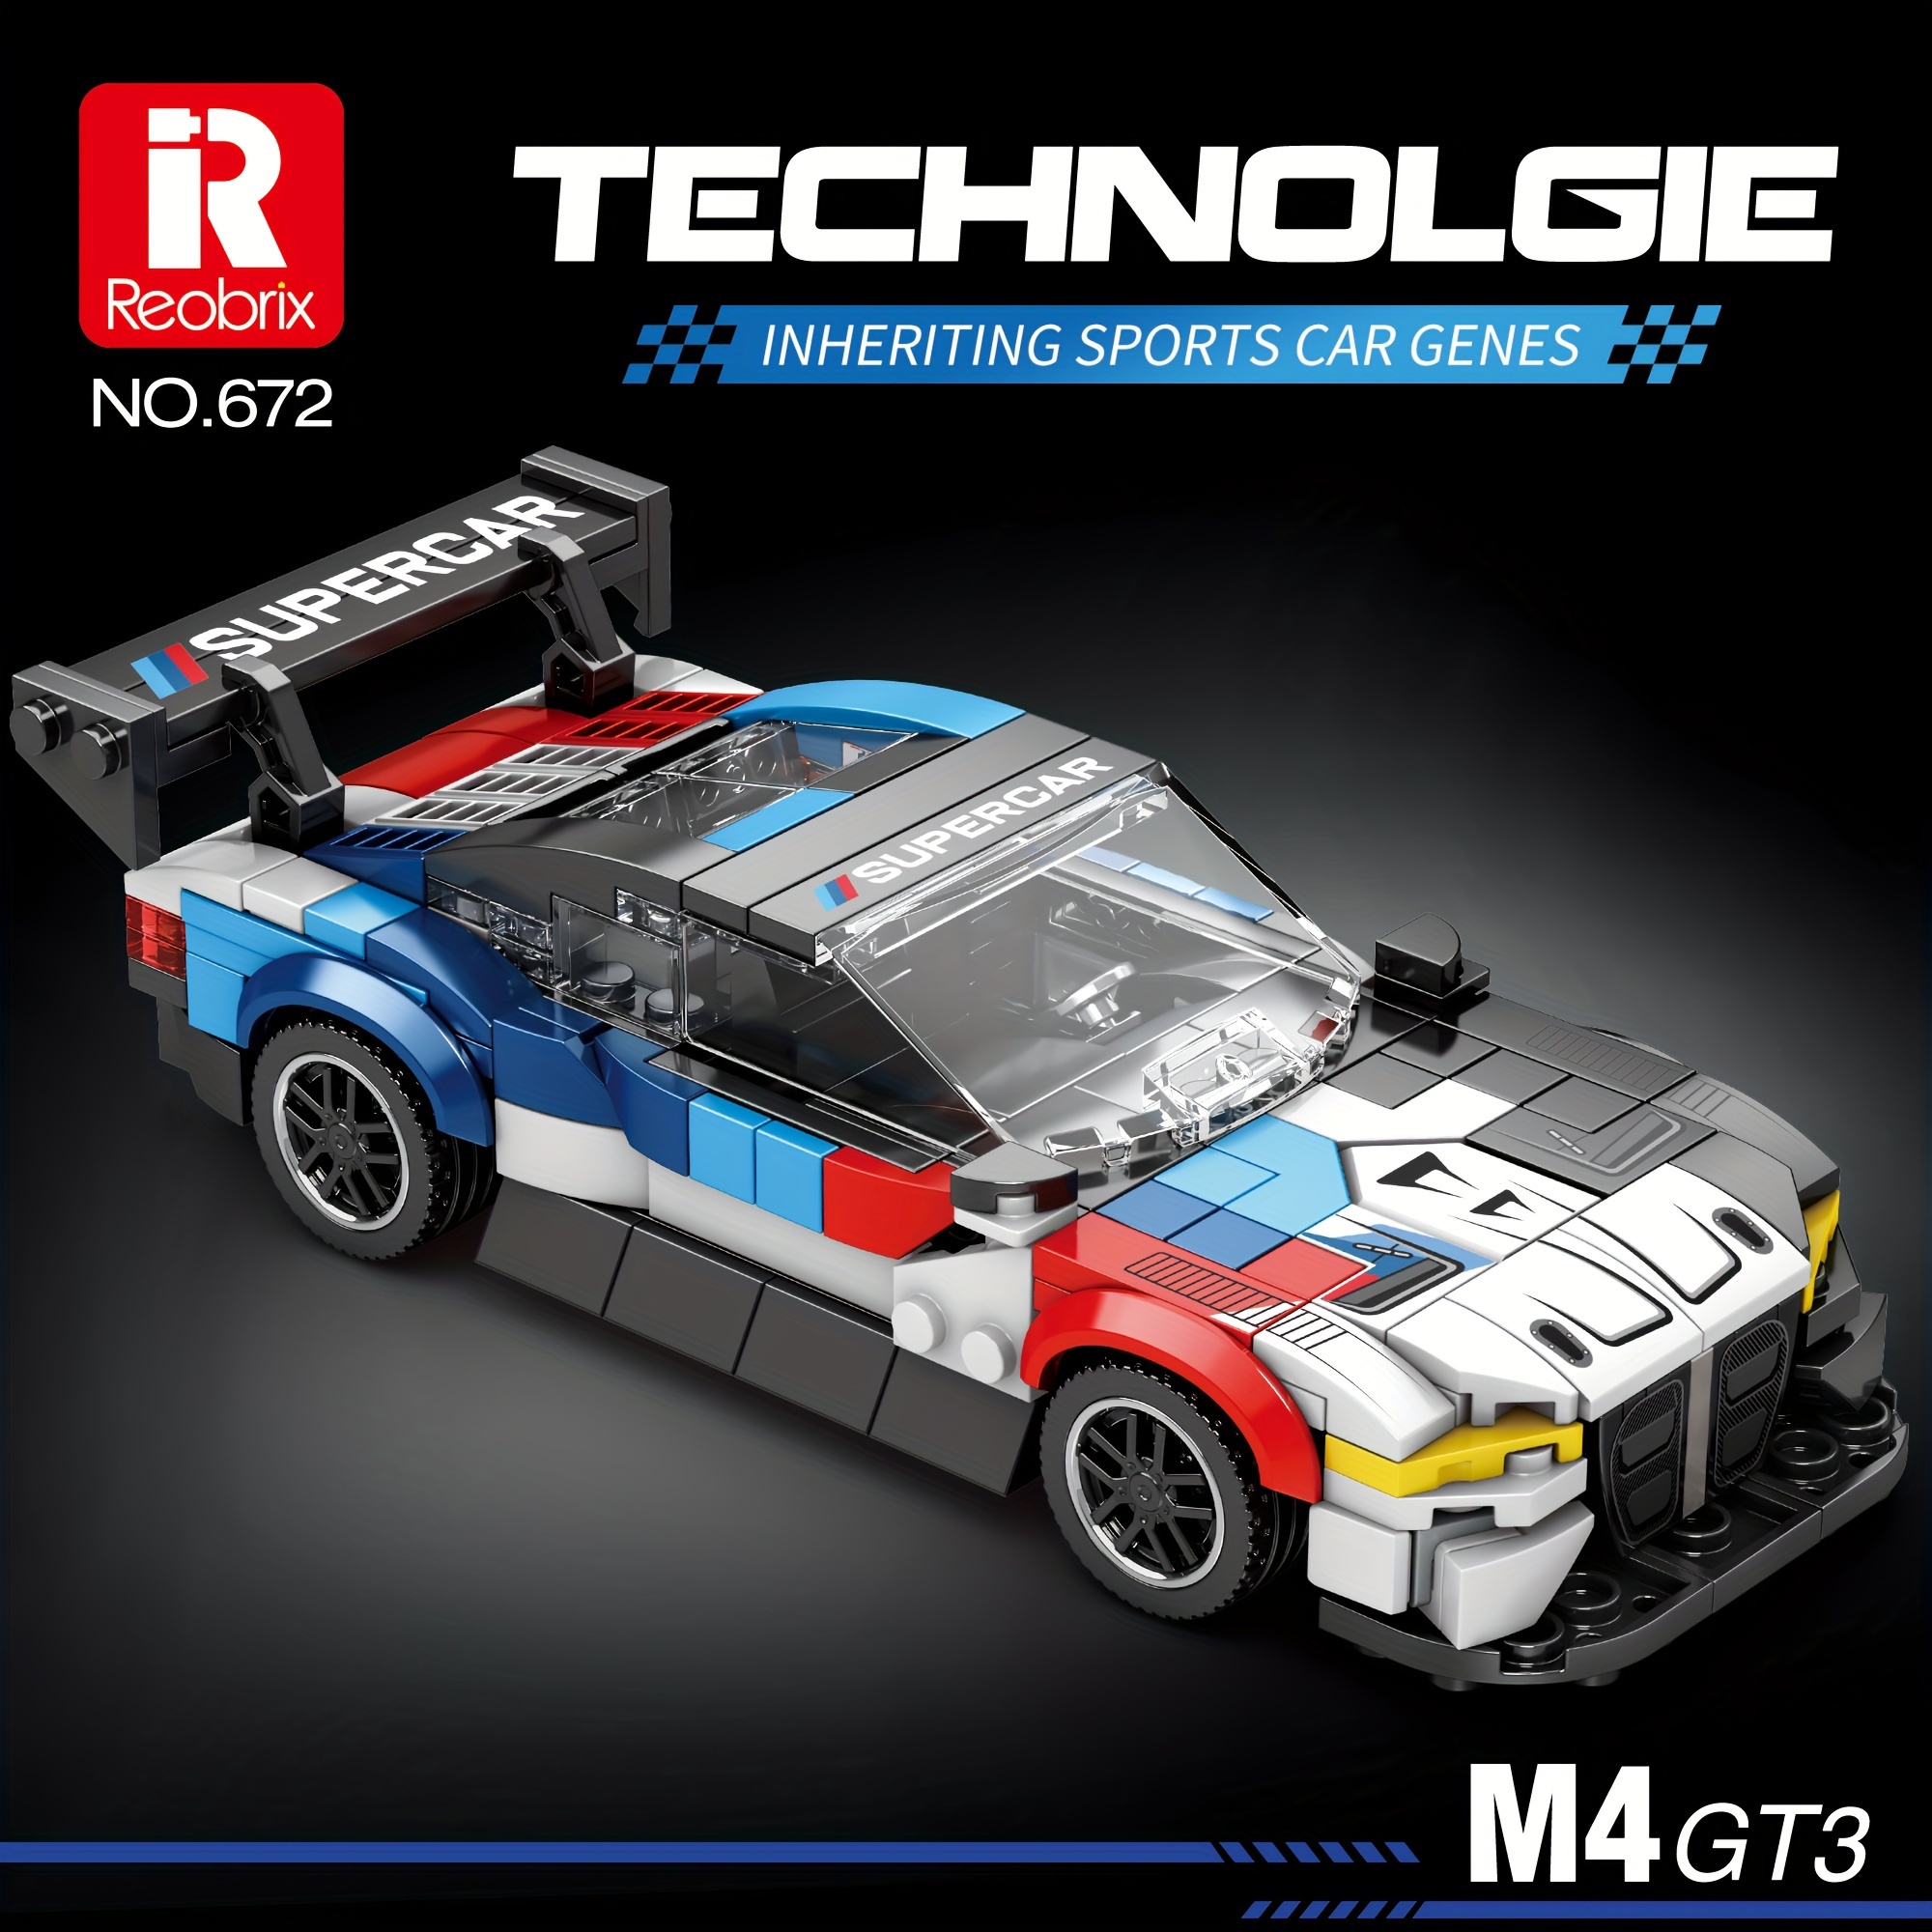 

Reobrix 672 Racing Car Building Toys, Collectible Car Model Building Kits, Moc Display Model Sports Car Building Set, A Great Gift For Car Lovers (385pcs)